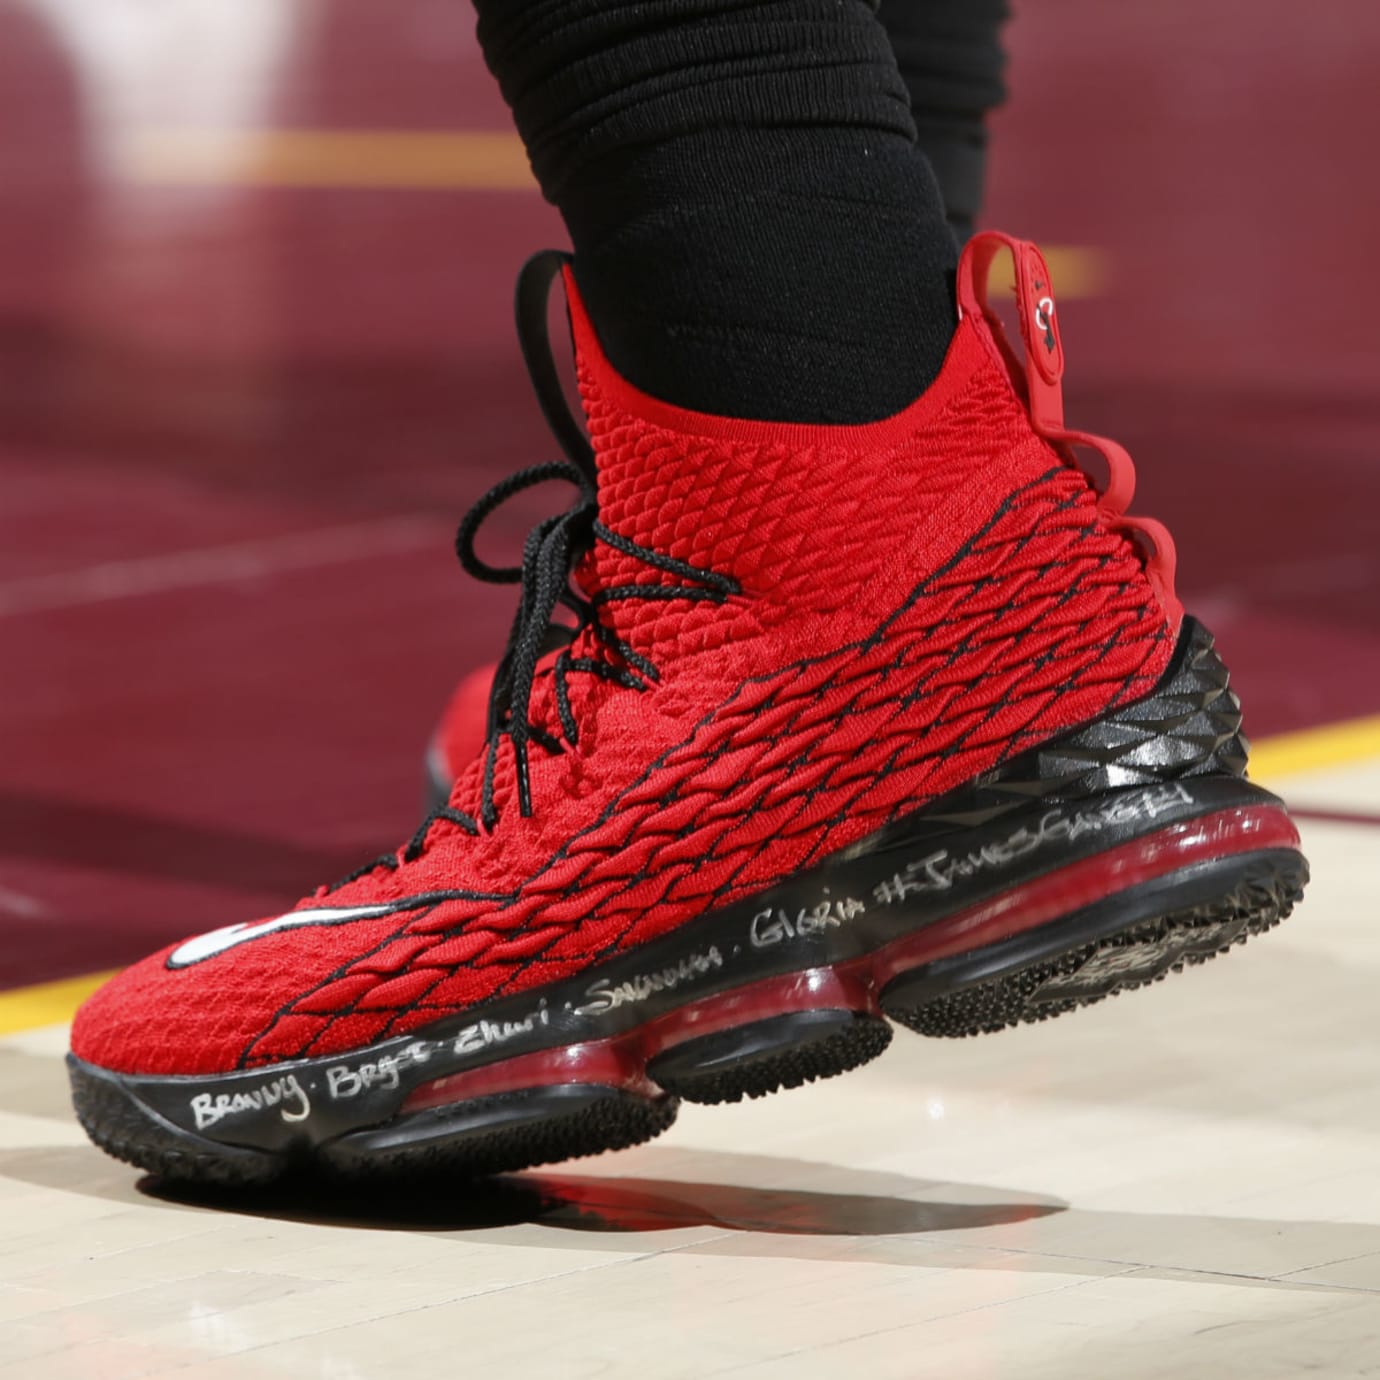 red lebron 15